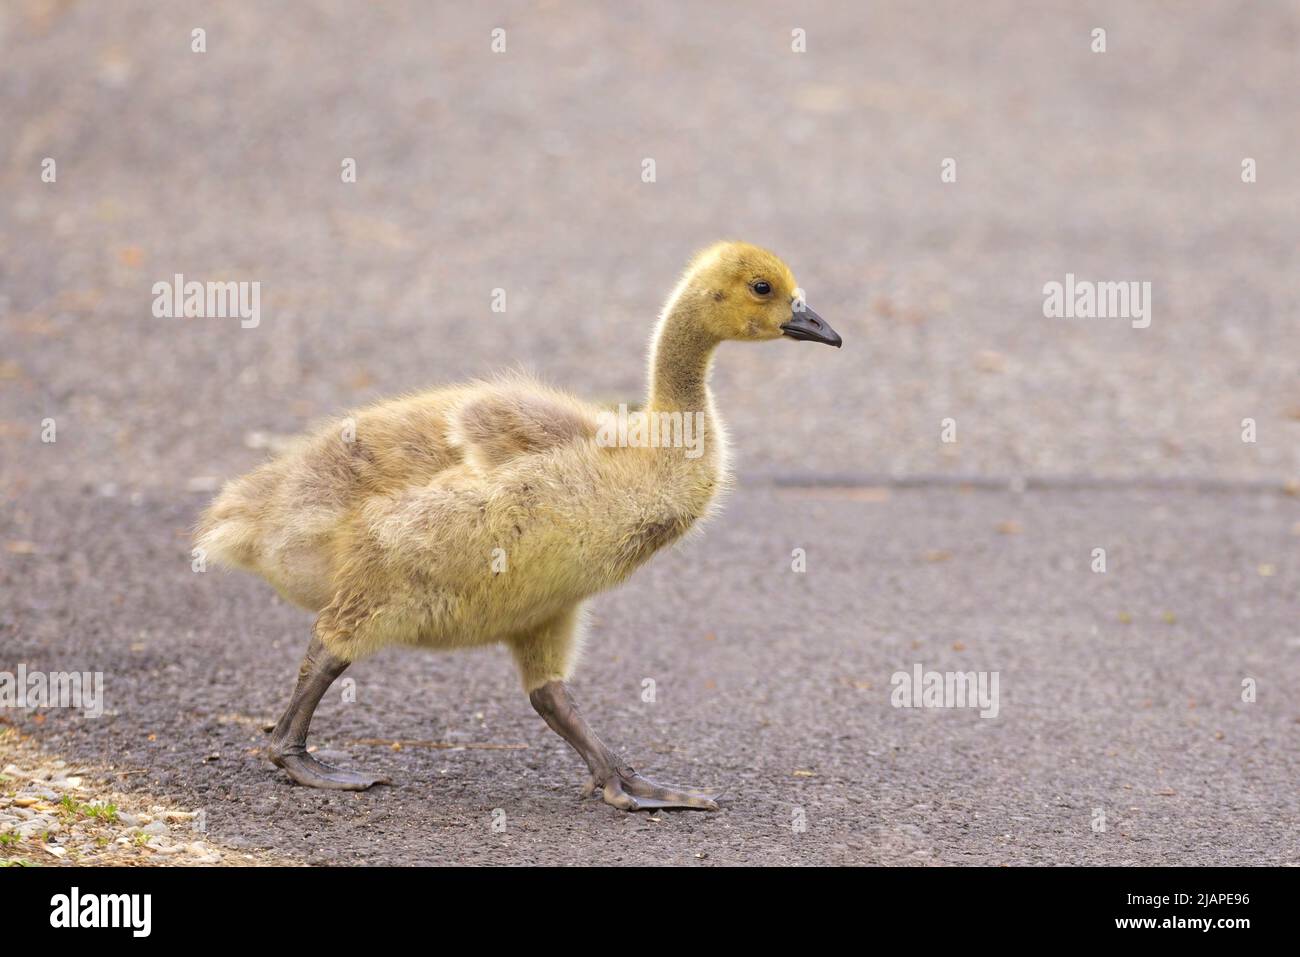 An older gosling walks on the paved path at Manito Park in Spokane, Washington. Stock Photo